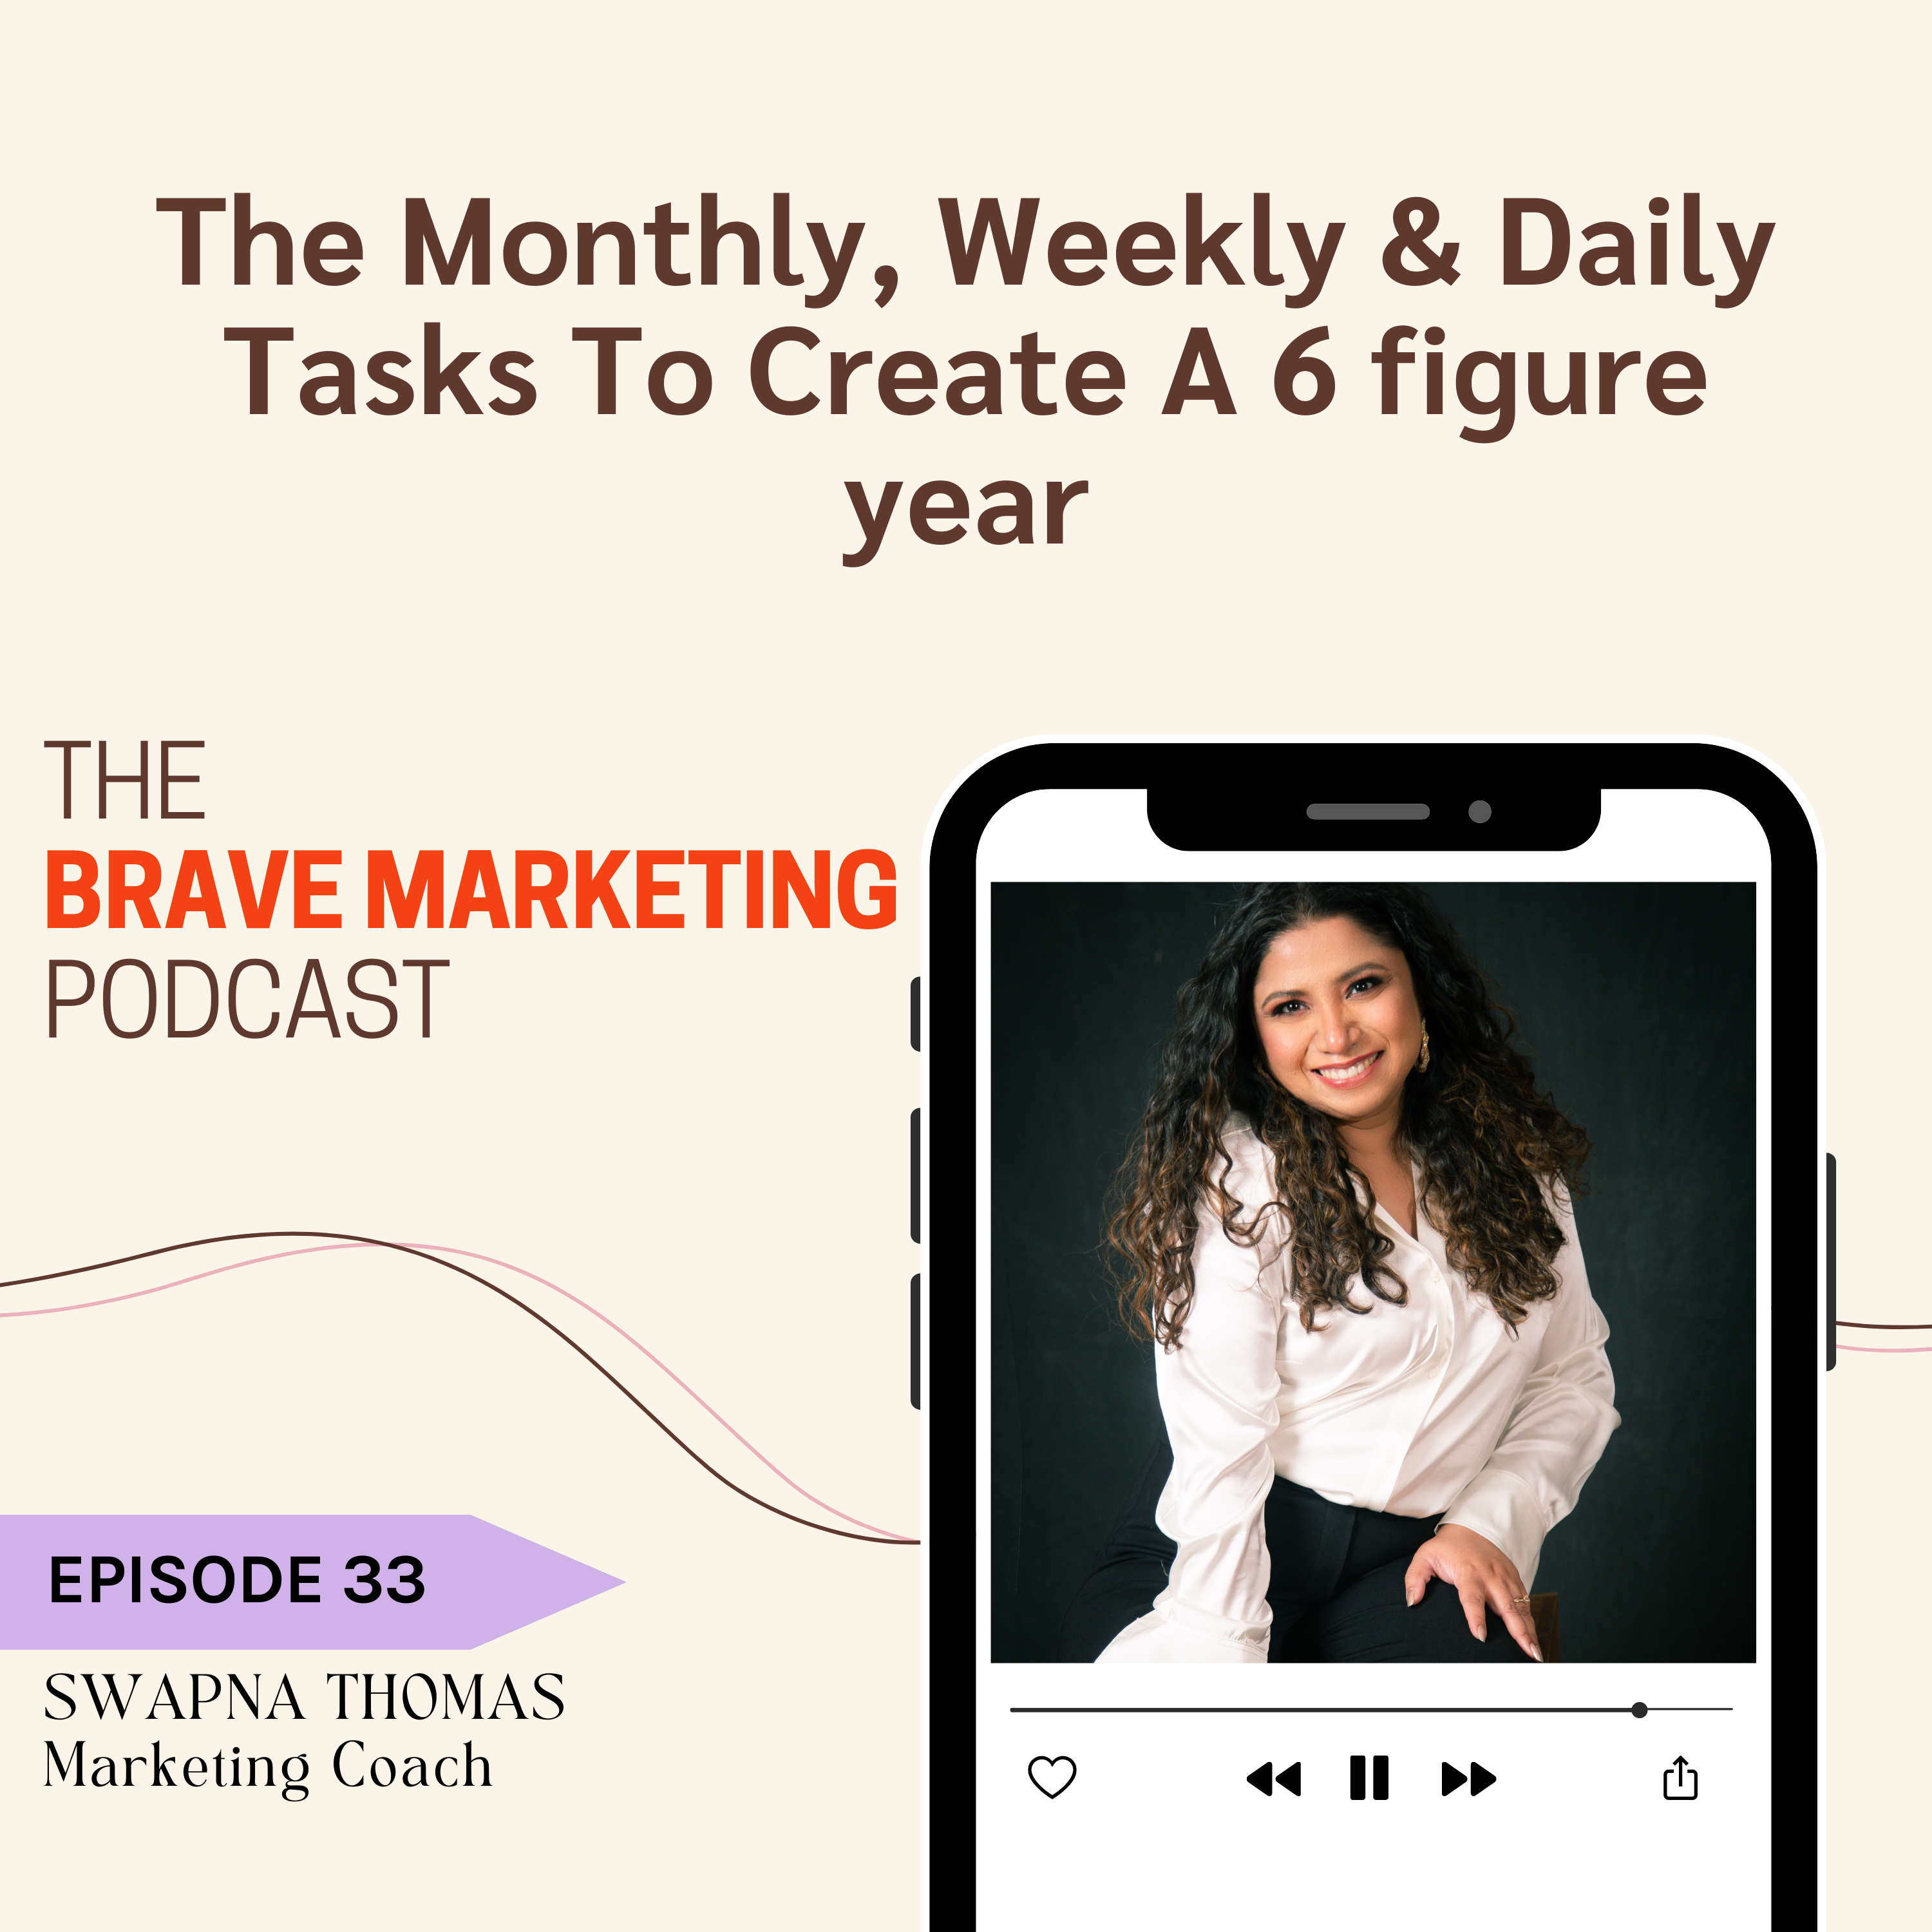 The Monthly, Weekly & Daily Tasks To Create A 6 figure year